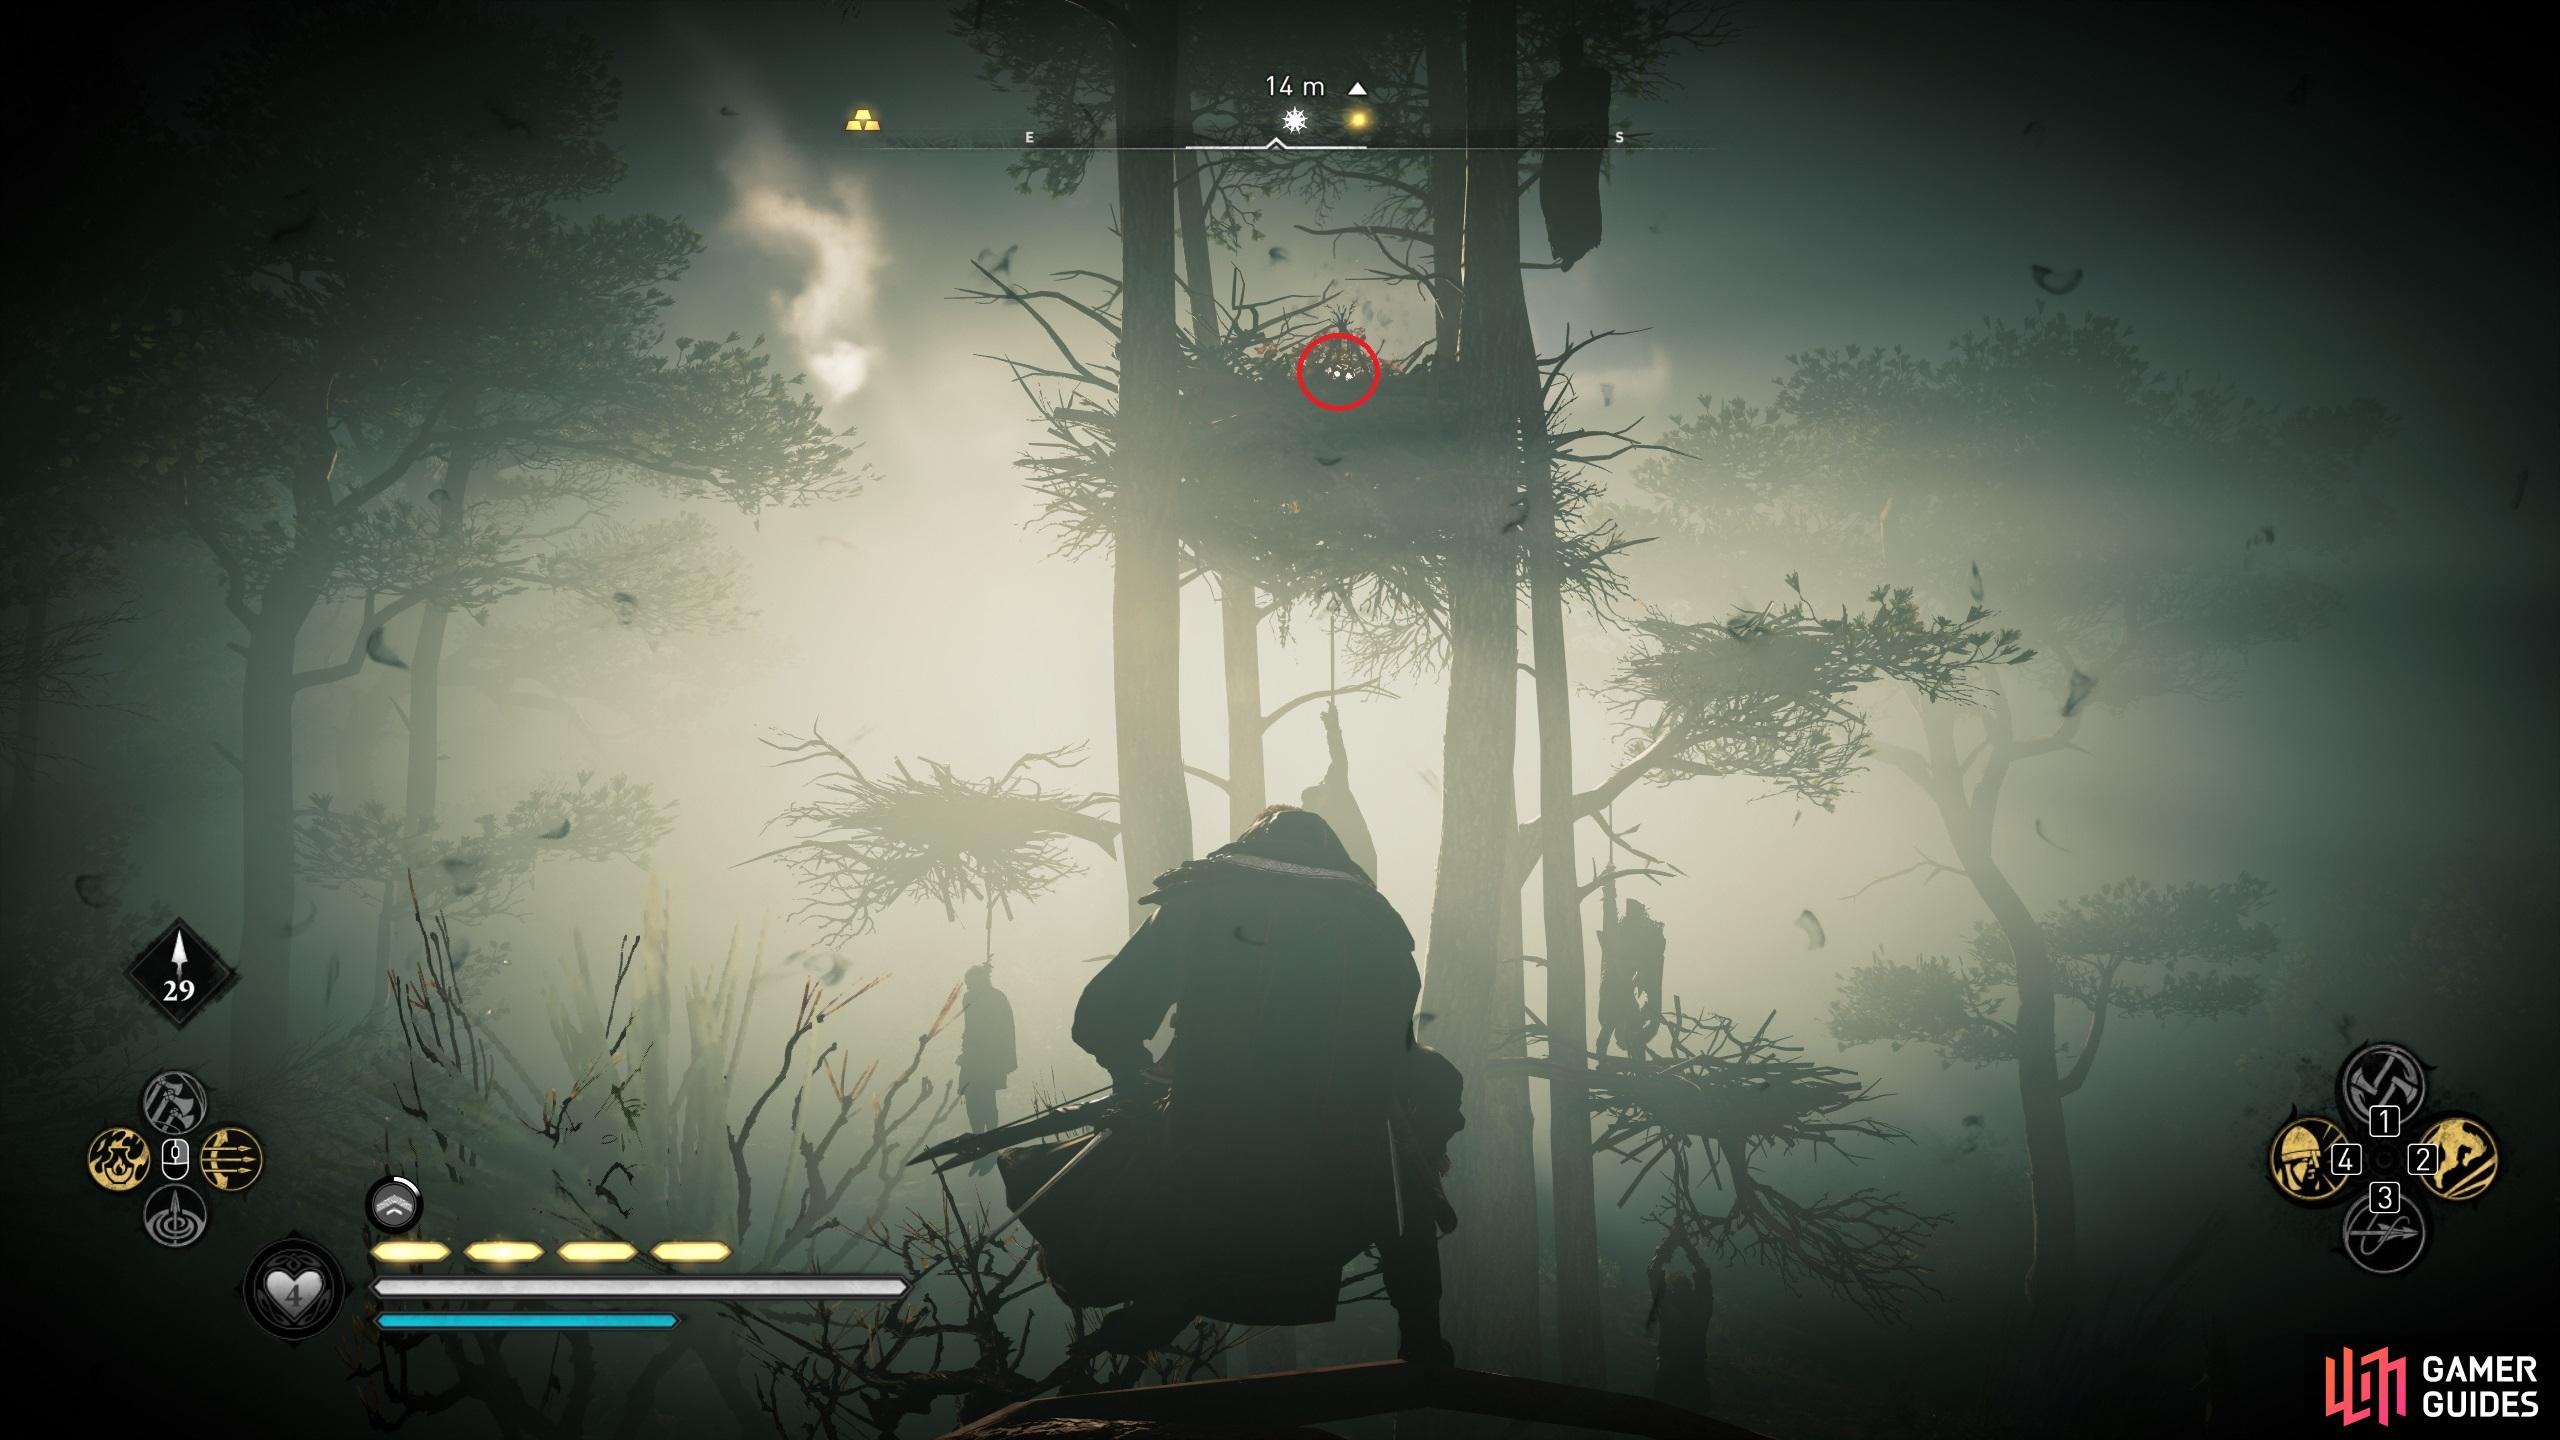 Once you've reached the vantage point, you'll be able to shoot the symbol from the branch.